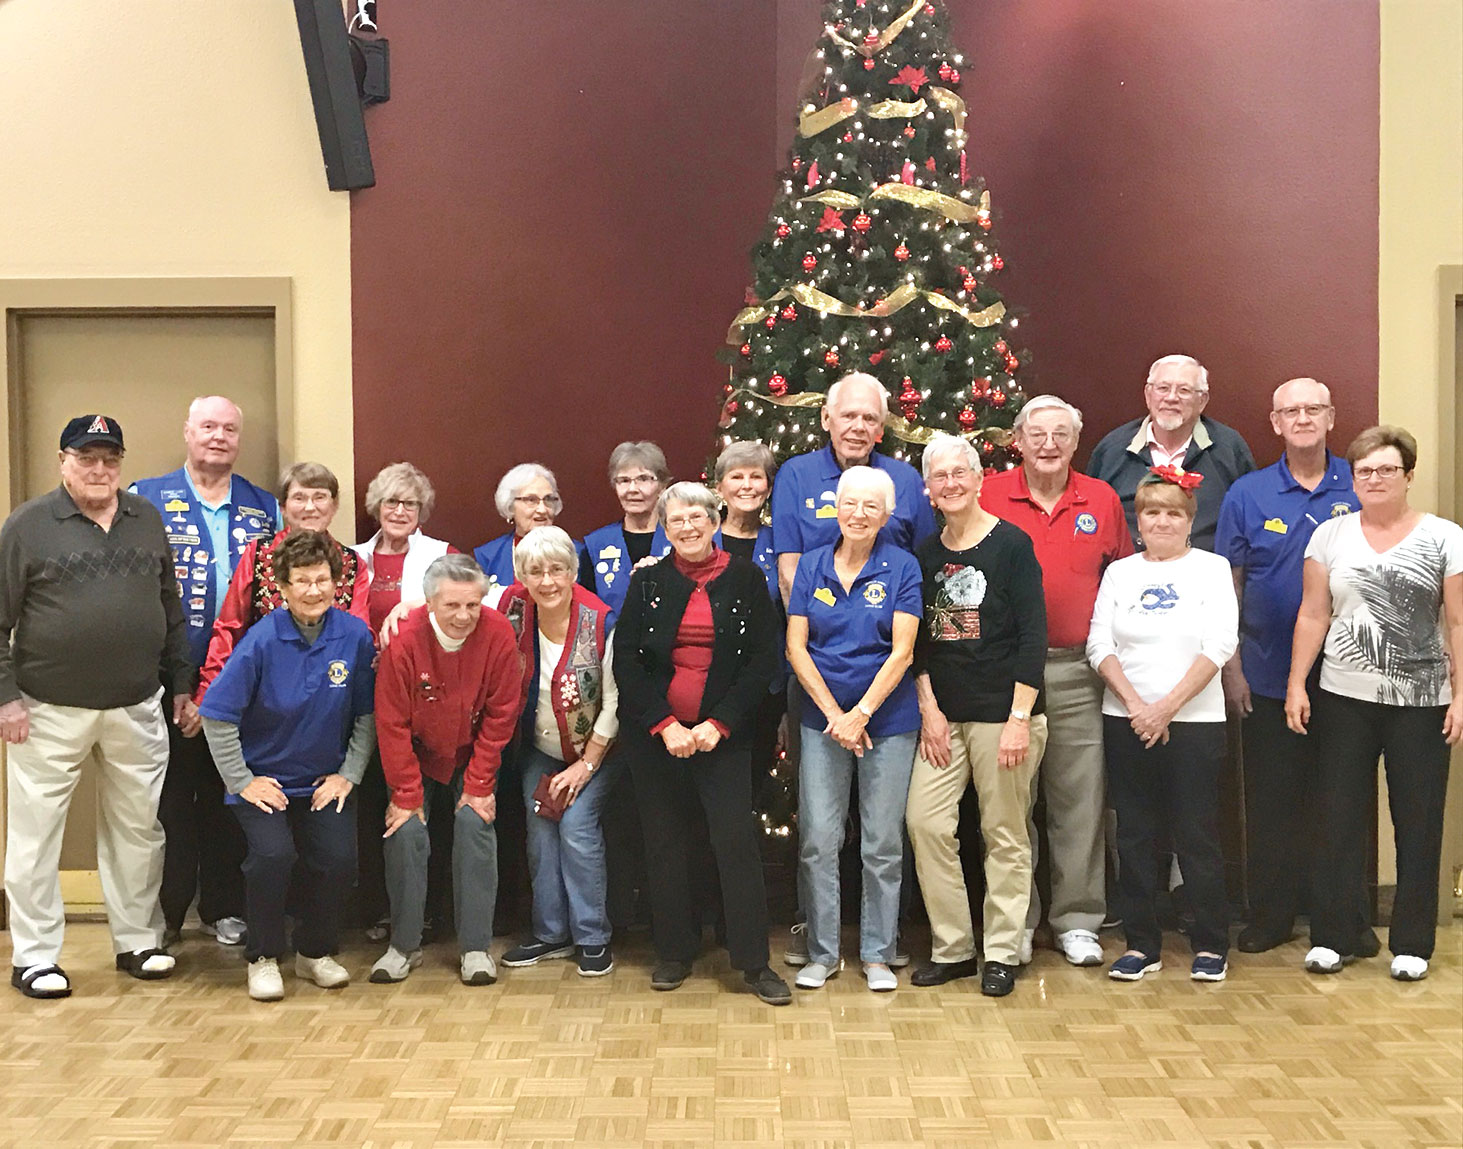 Members of the Chandler SunBird Lions Club celebrating Christmas with a potluck dinner and games.